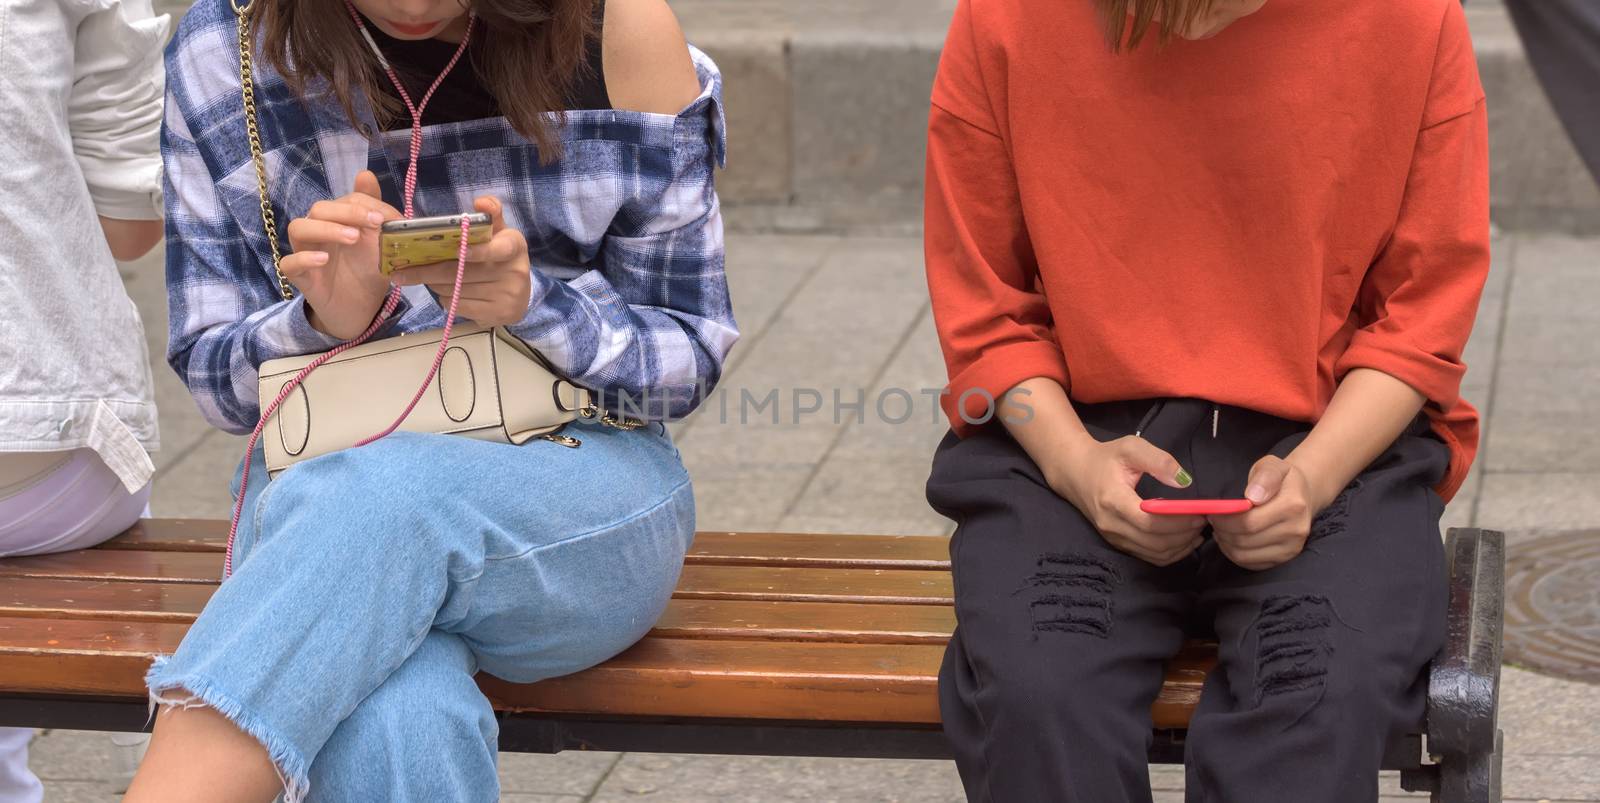 Woman using smart phone. Girls look at smartphones. Girl with phone